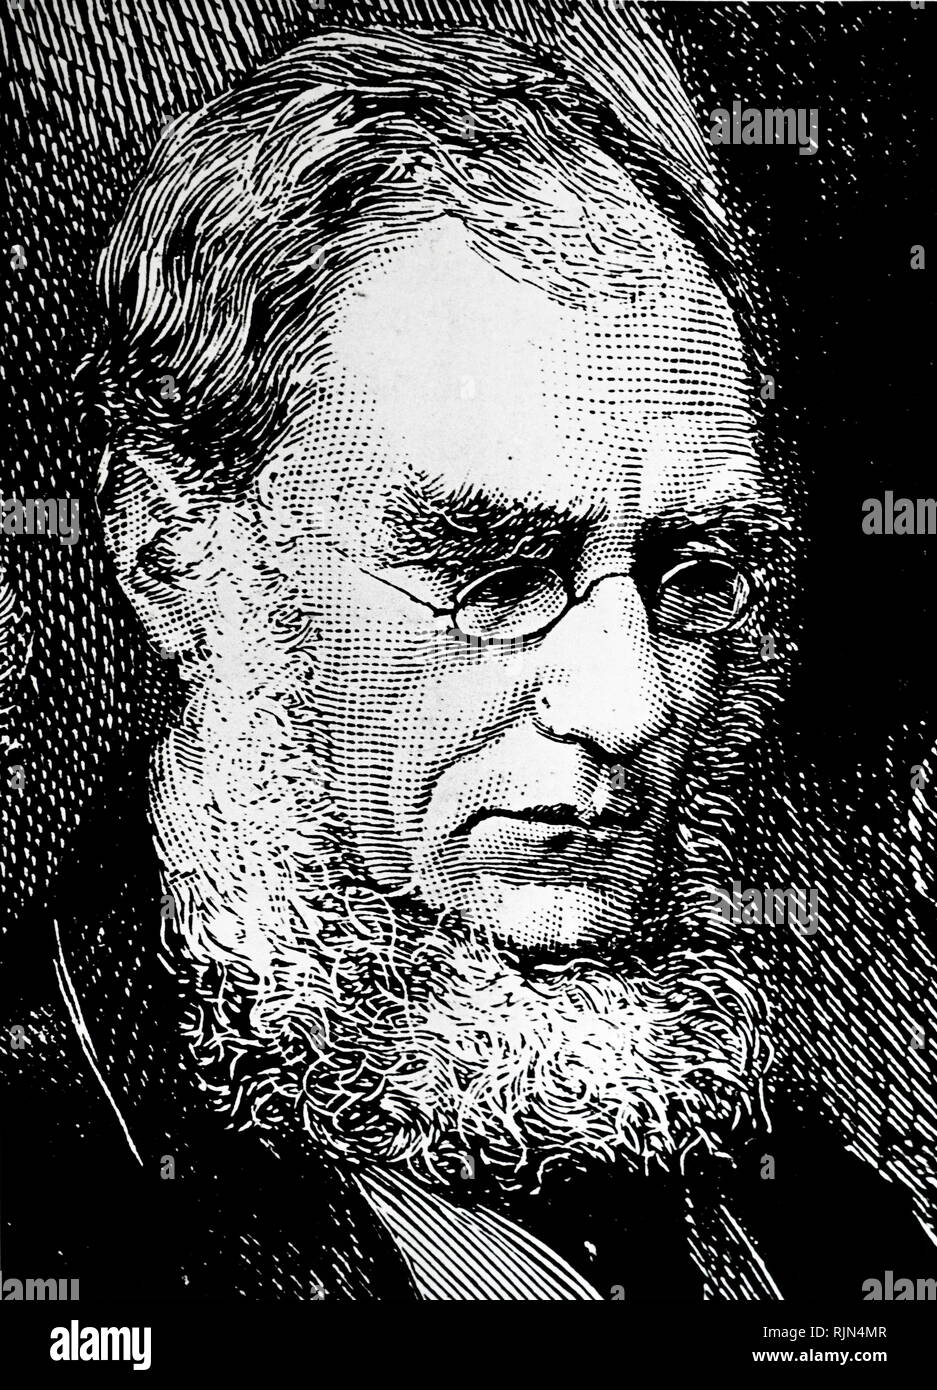 Illustration showing Sir Joseph Dalton Hooker (1817 – 1911); British botanist and explorer in the 19th century. He was a founder of geographical botany and Charles Darwin's closest friend. For twenty years he served as director of the Royal Botanical Gardens, Kew, Stock Photo